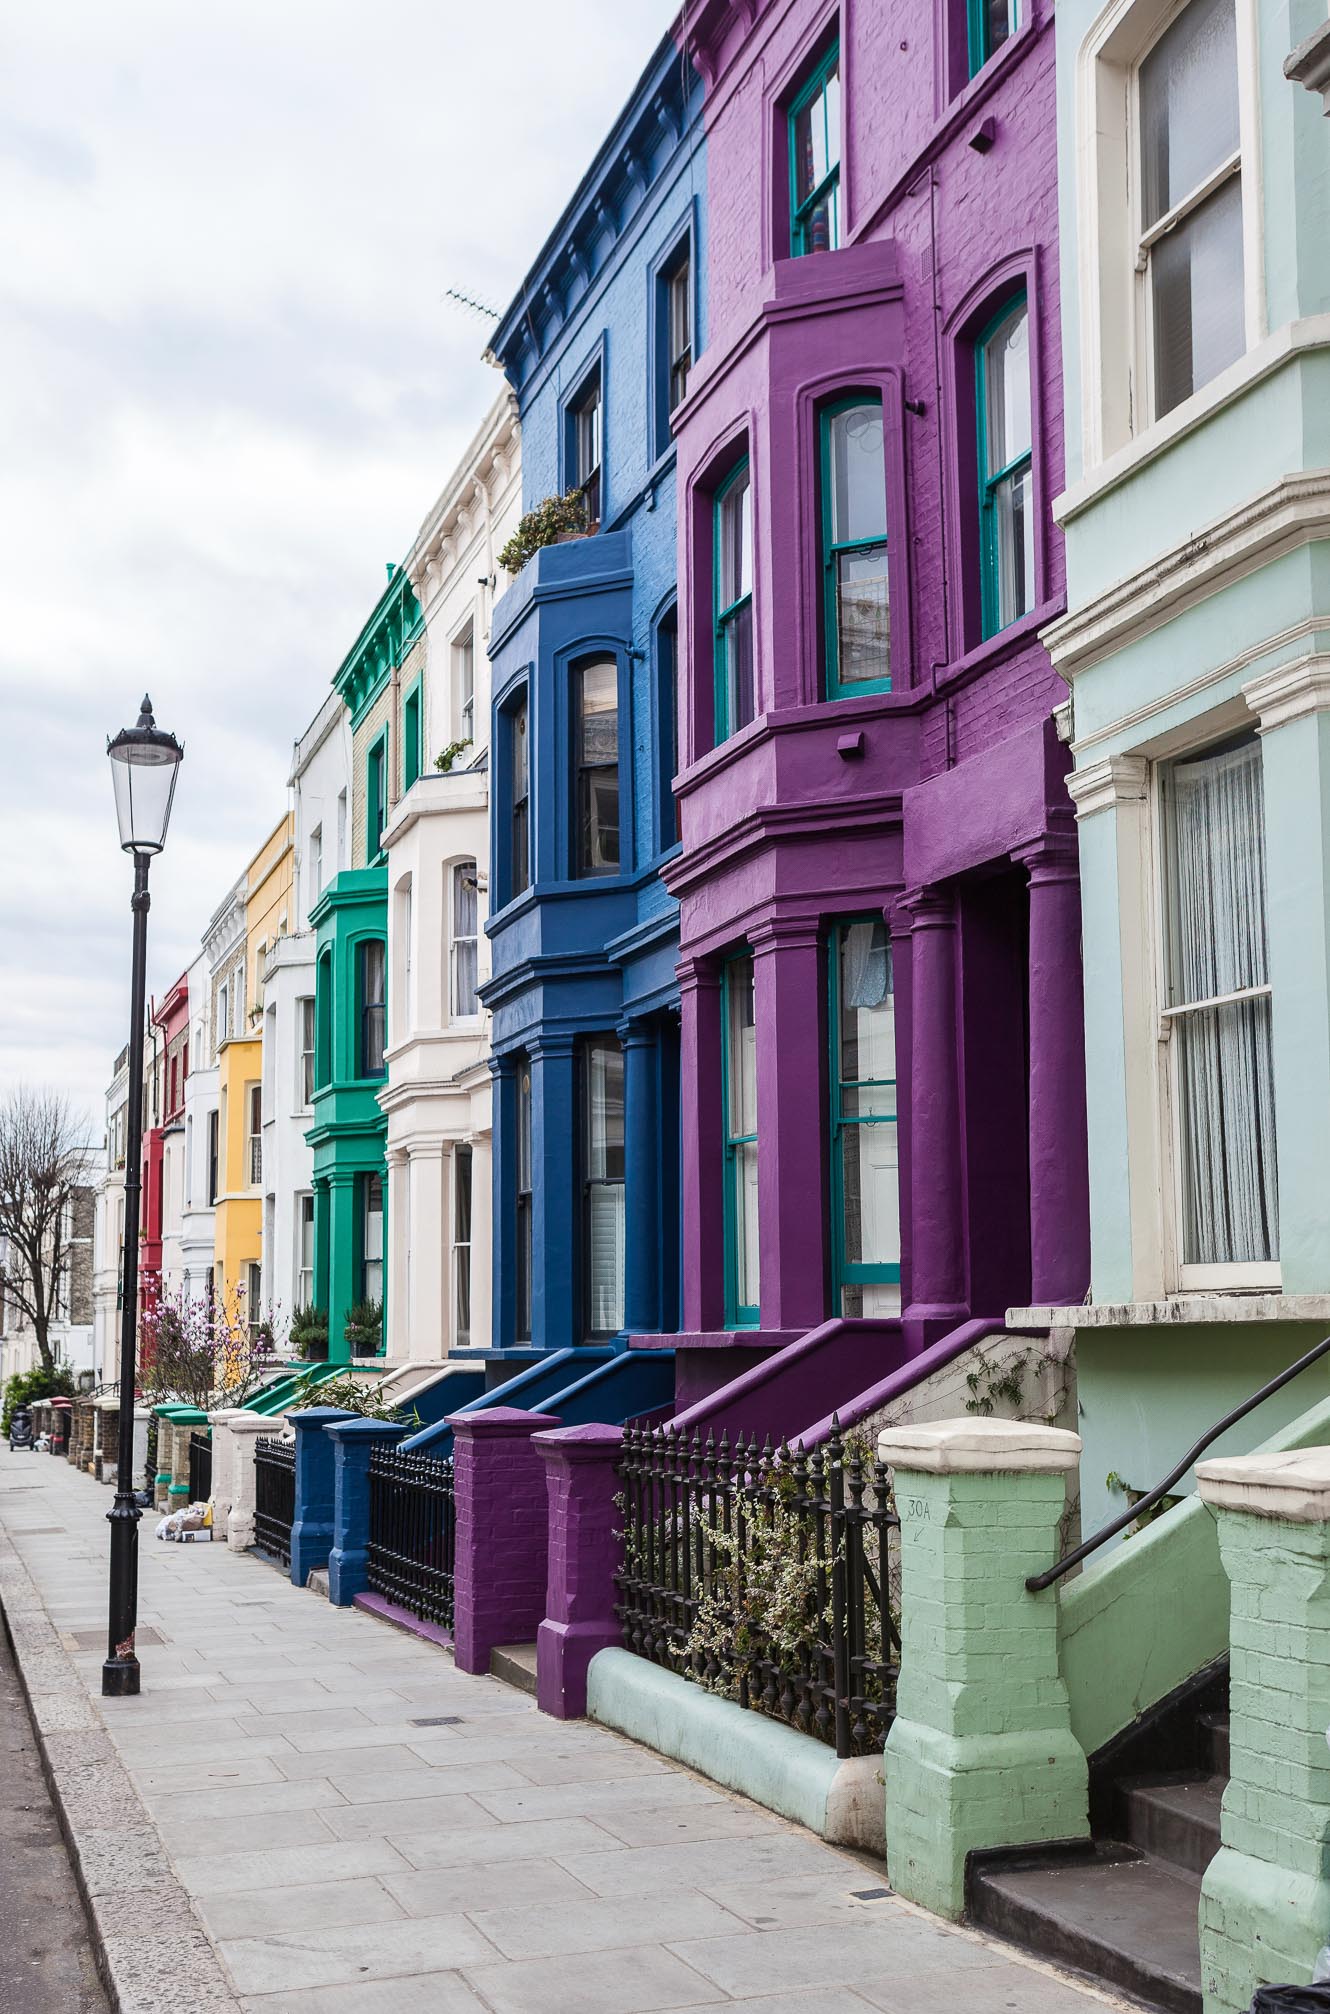 Multi-colored houses in Notting Hill, London, England